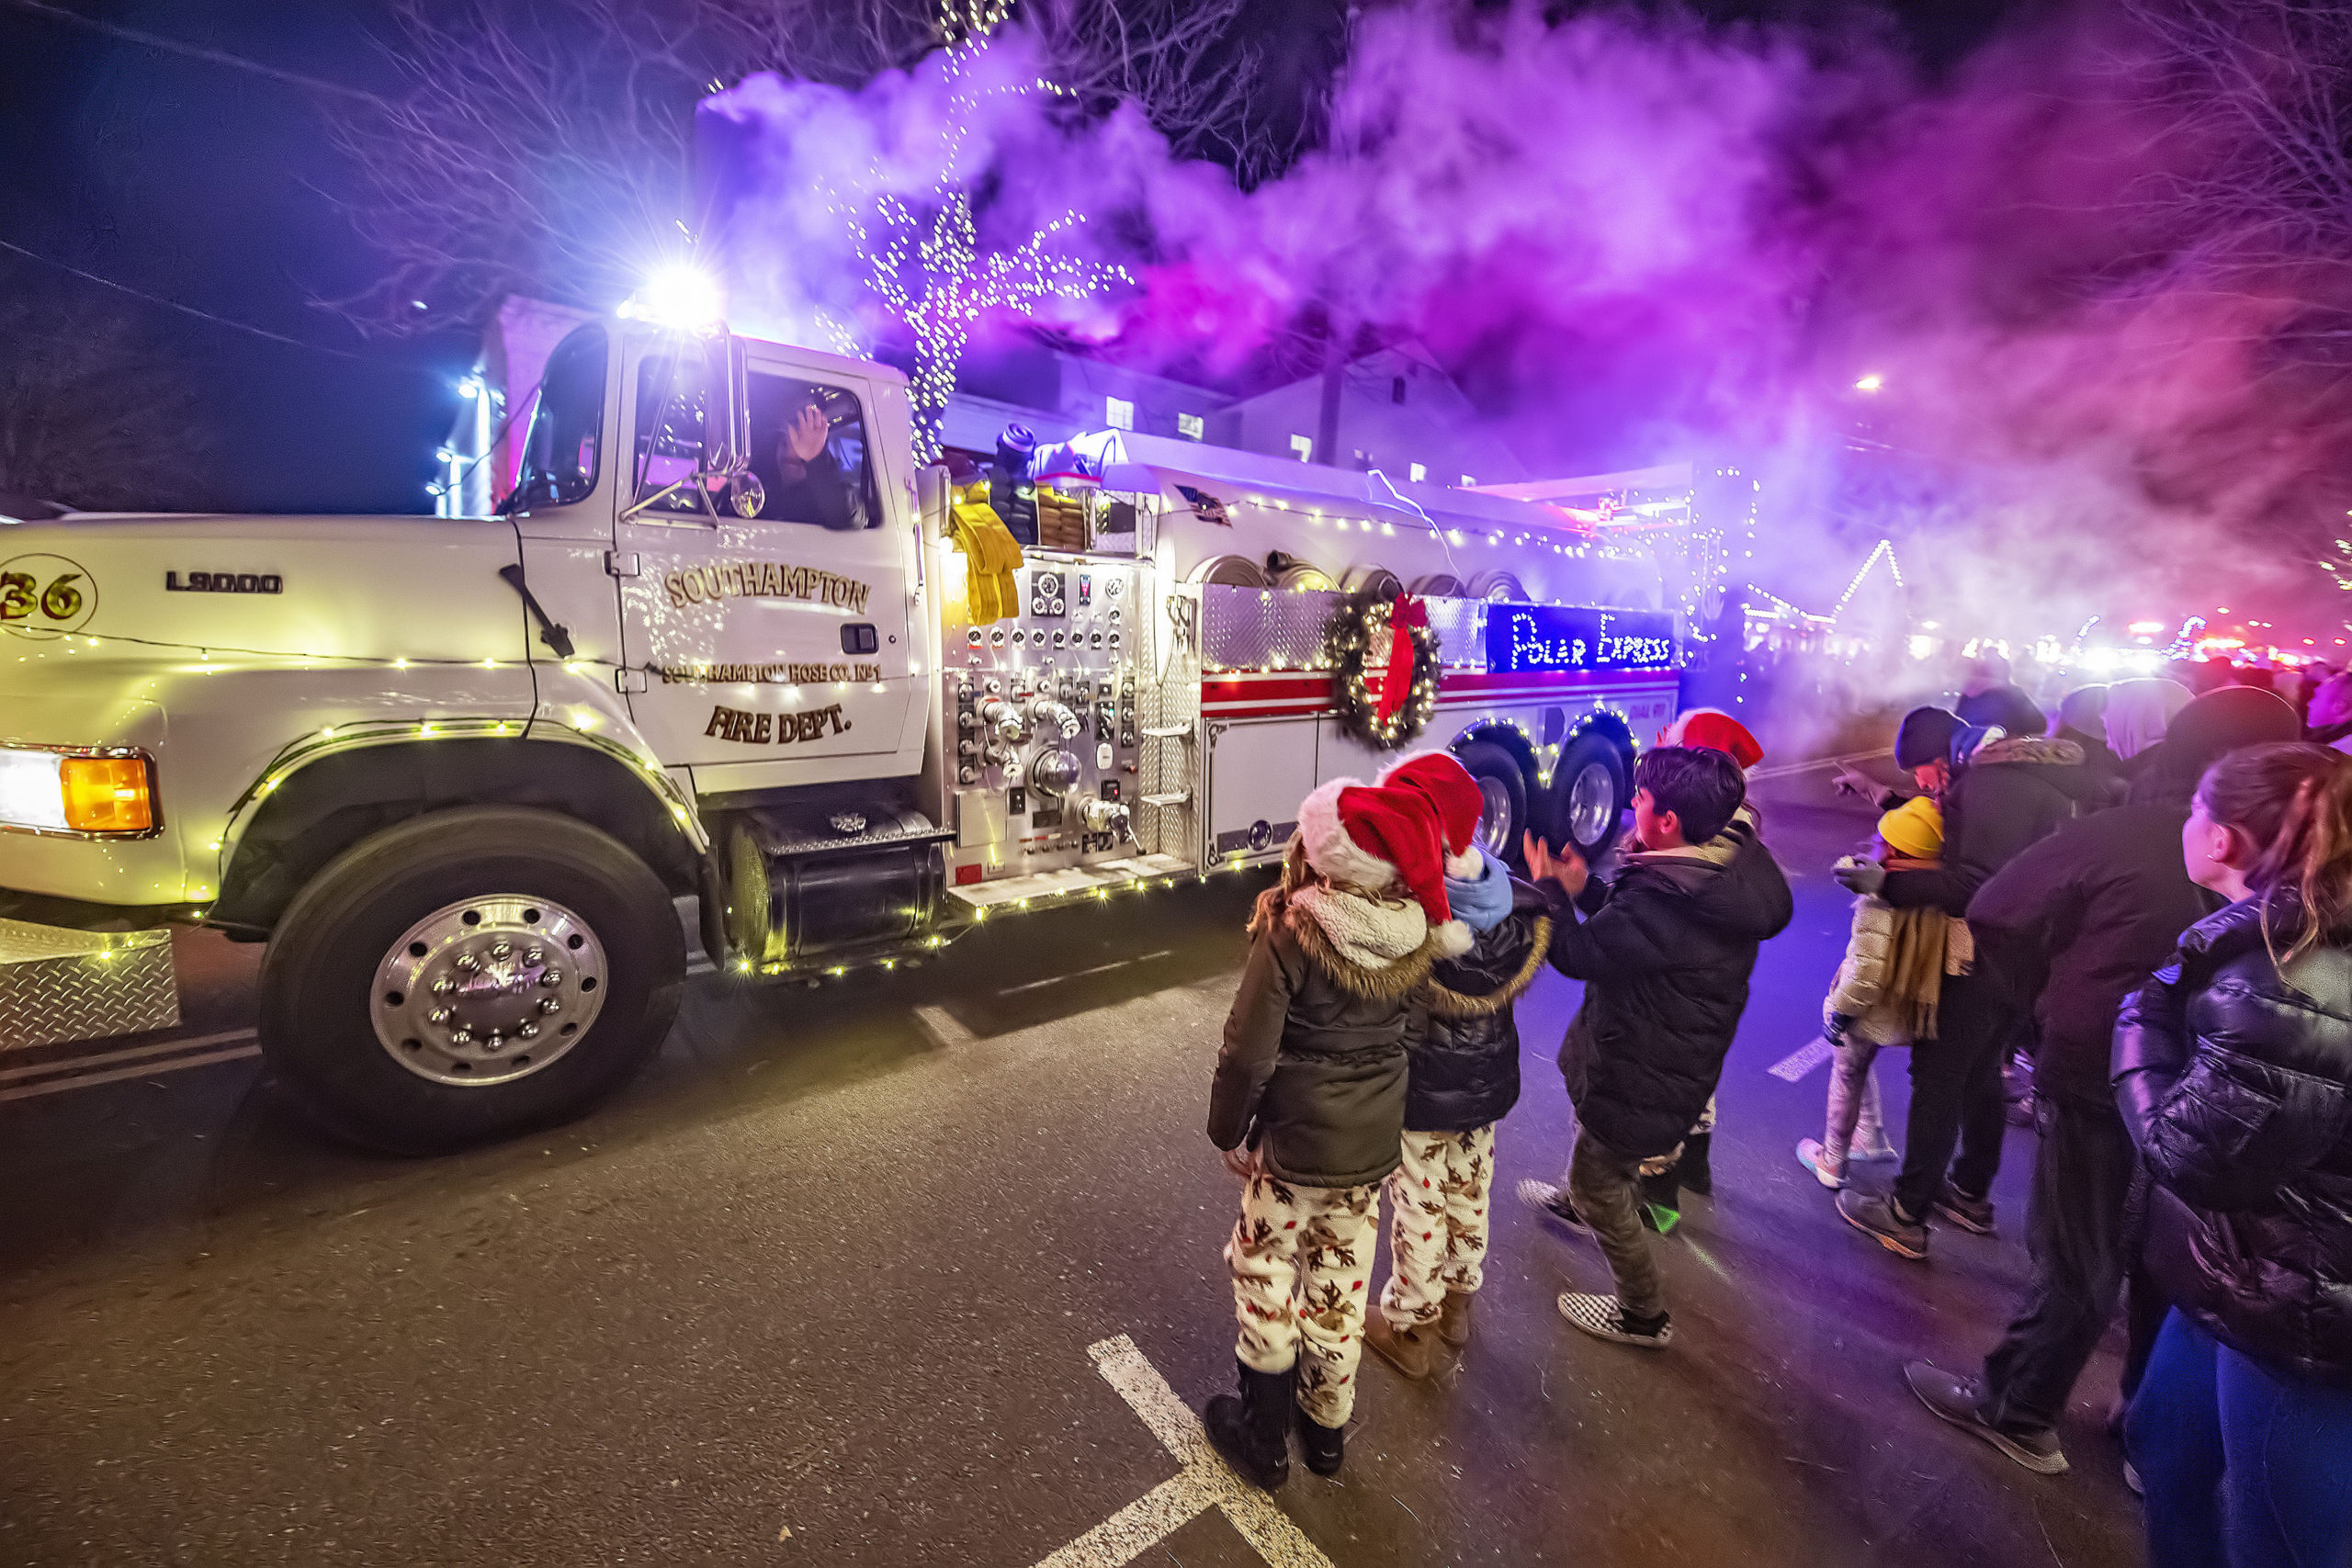 The Southampton Fire Department's tanker truck was transformed into the Polar Express during the 2021 Parade of Lights along Jobs Lane on Saturday night. MICHAEL HELLER